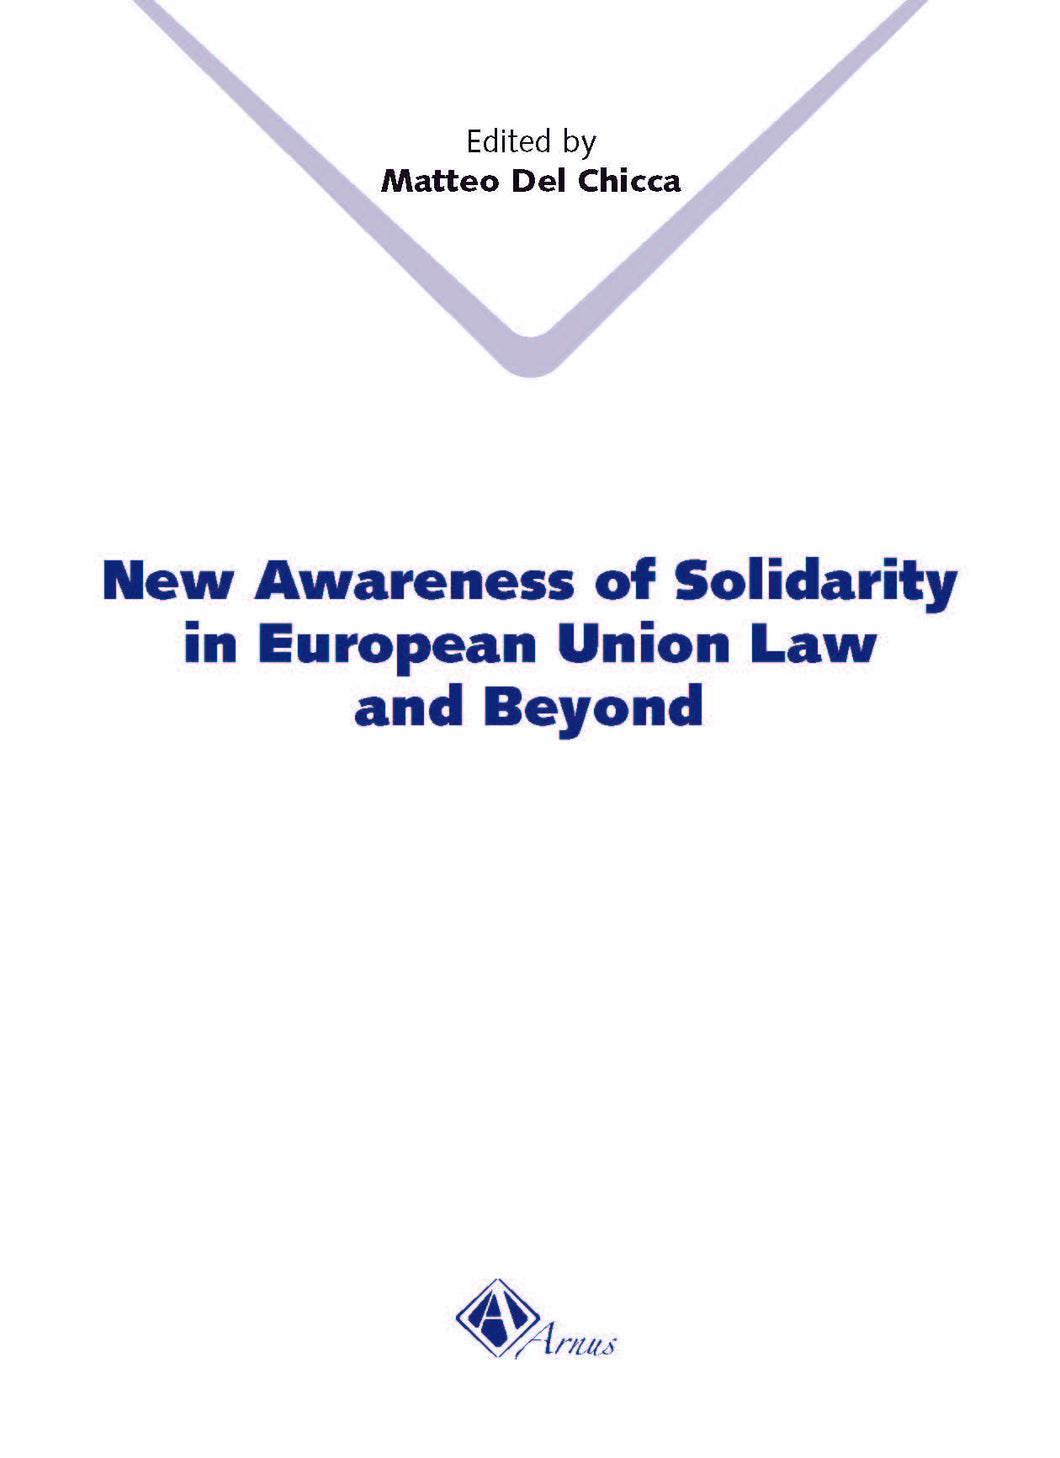 New Awareness of Solidarity in European Union Law and Beyond